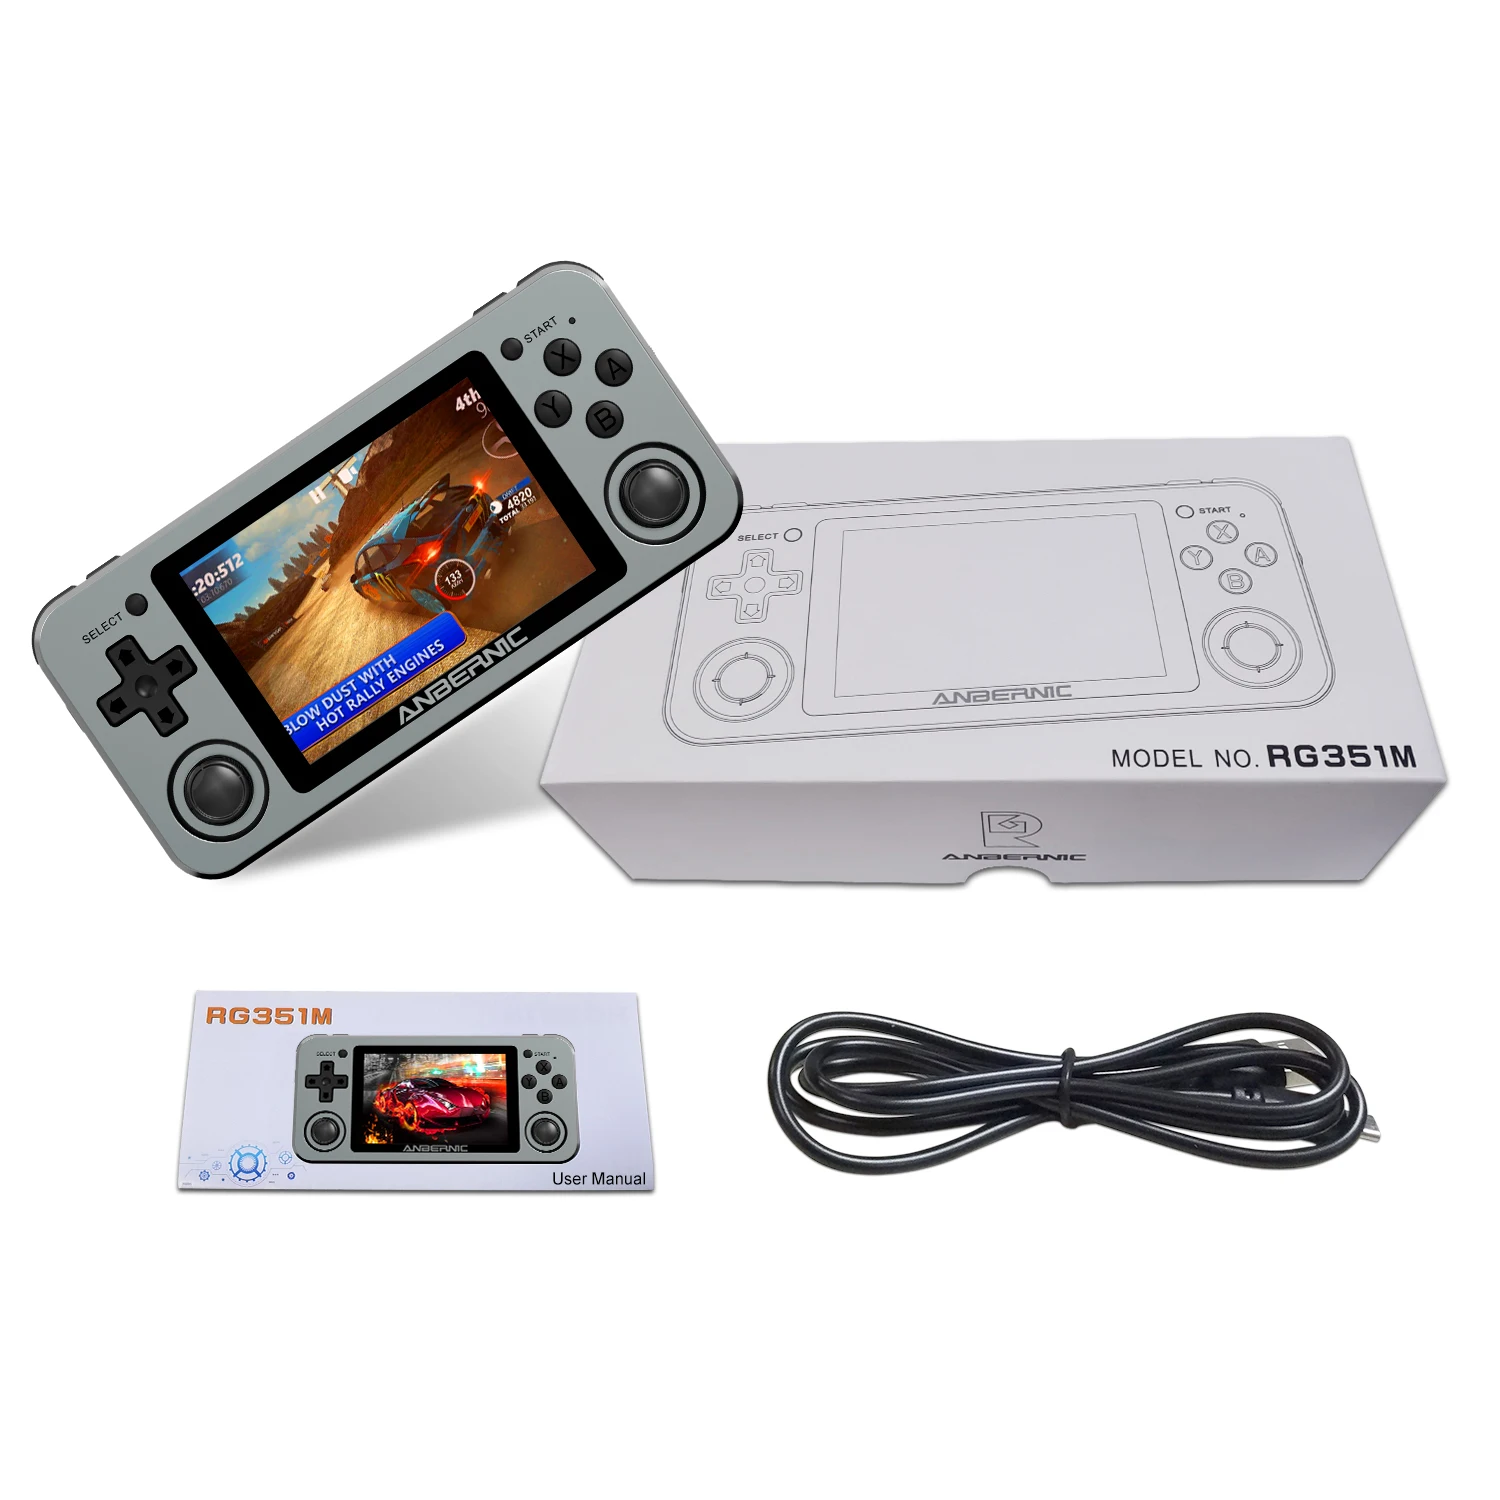 

New RG351M with 64GB card emulator game console metal retro pocket wholesale game consoles game console arcade machine, 2 colors